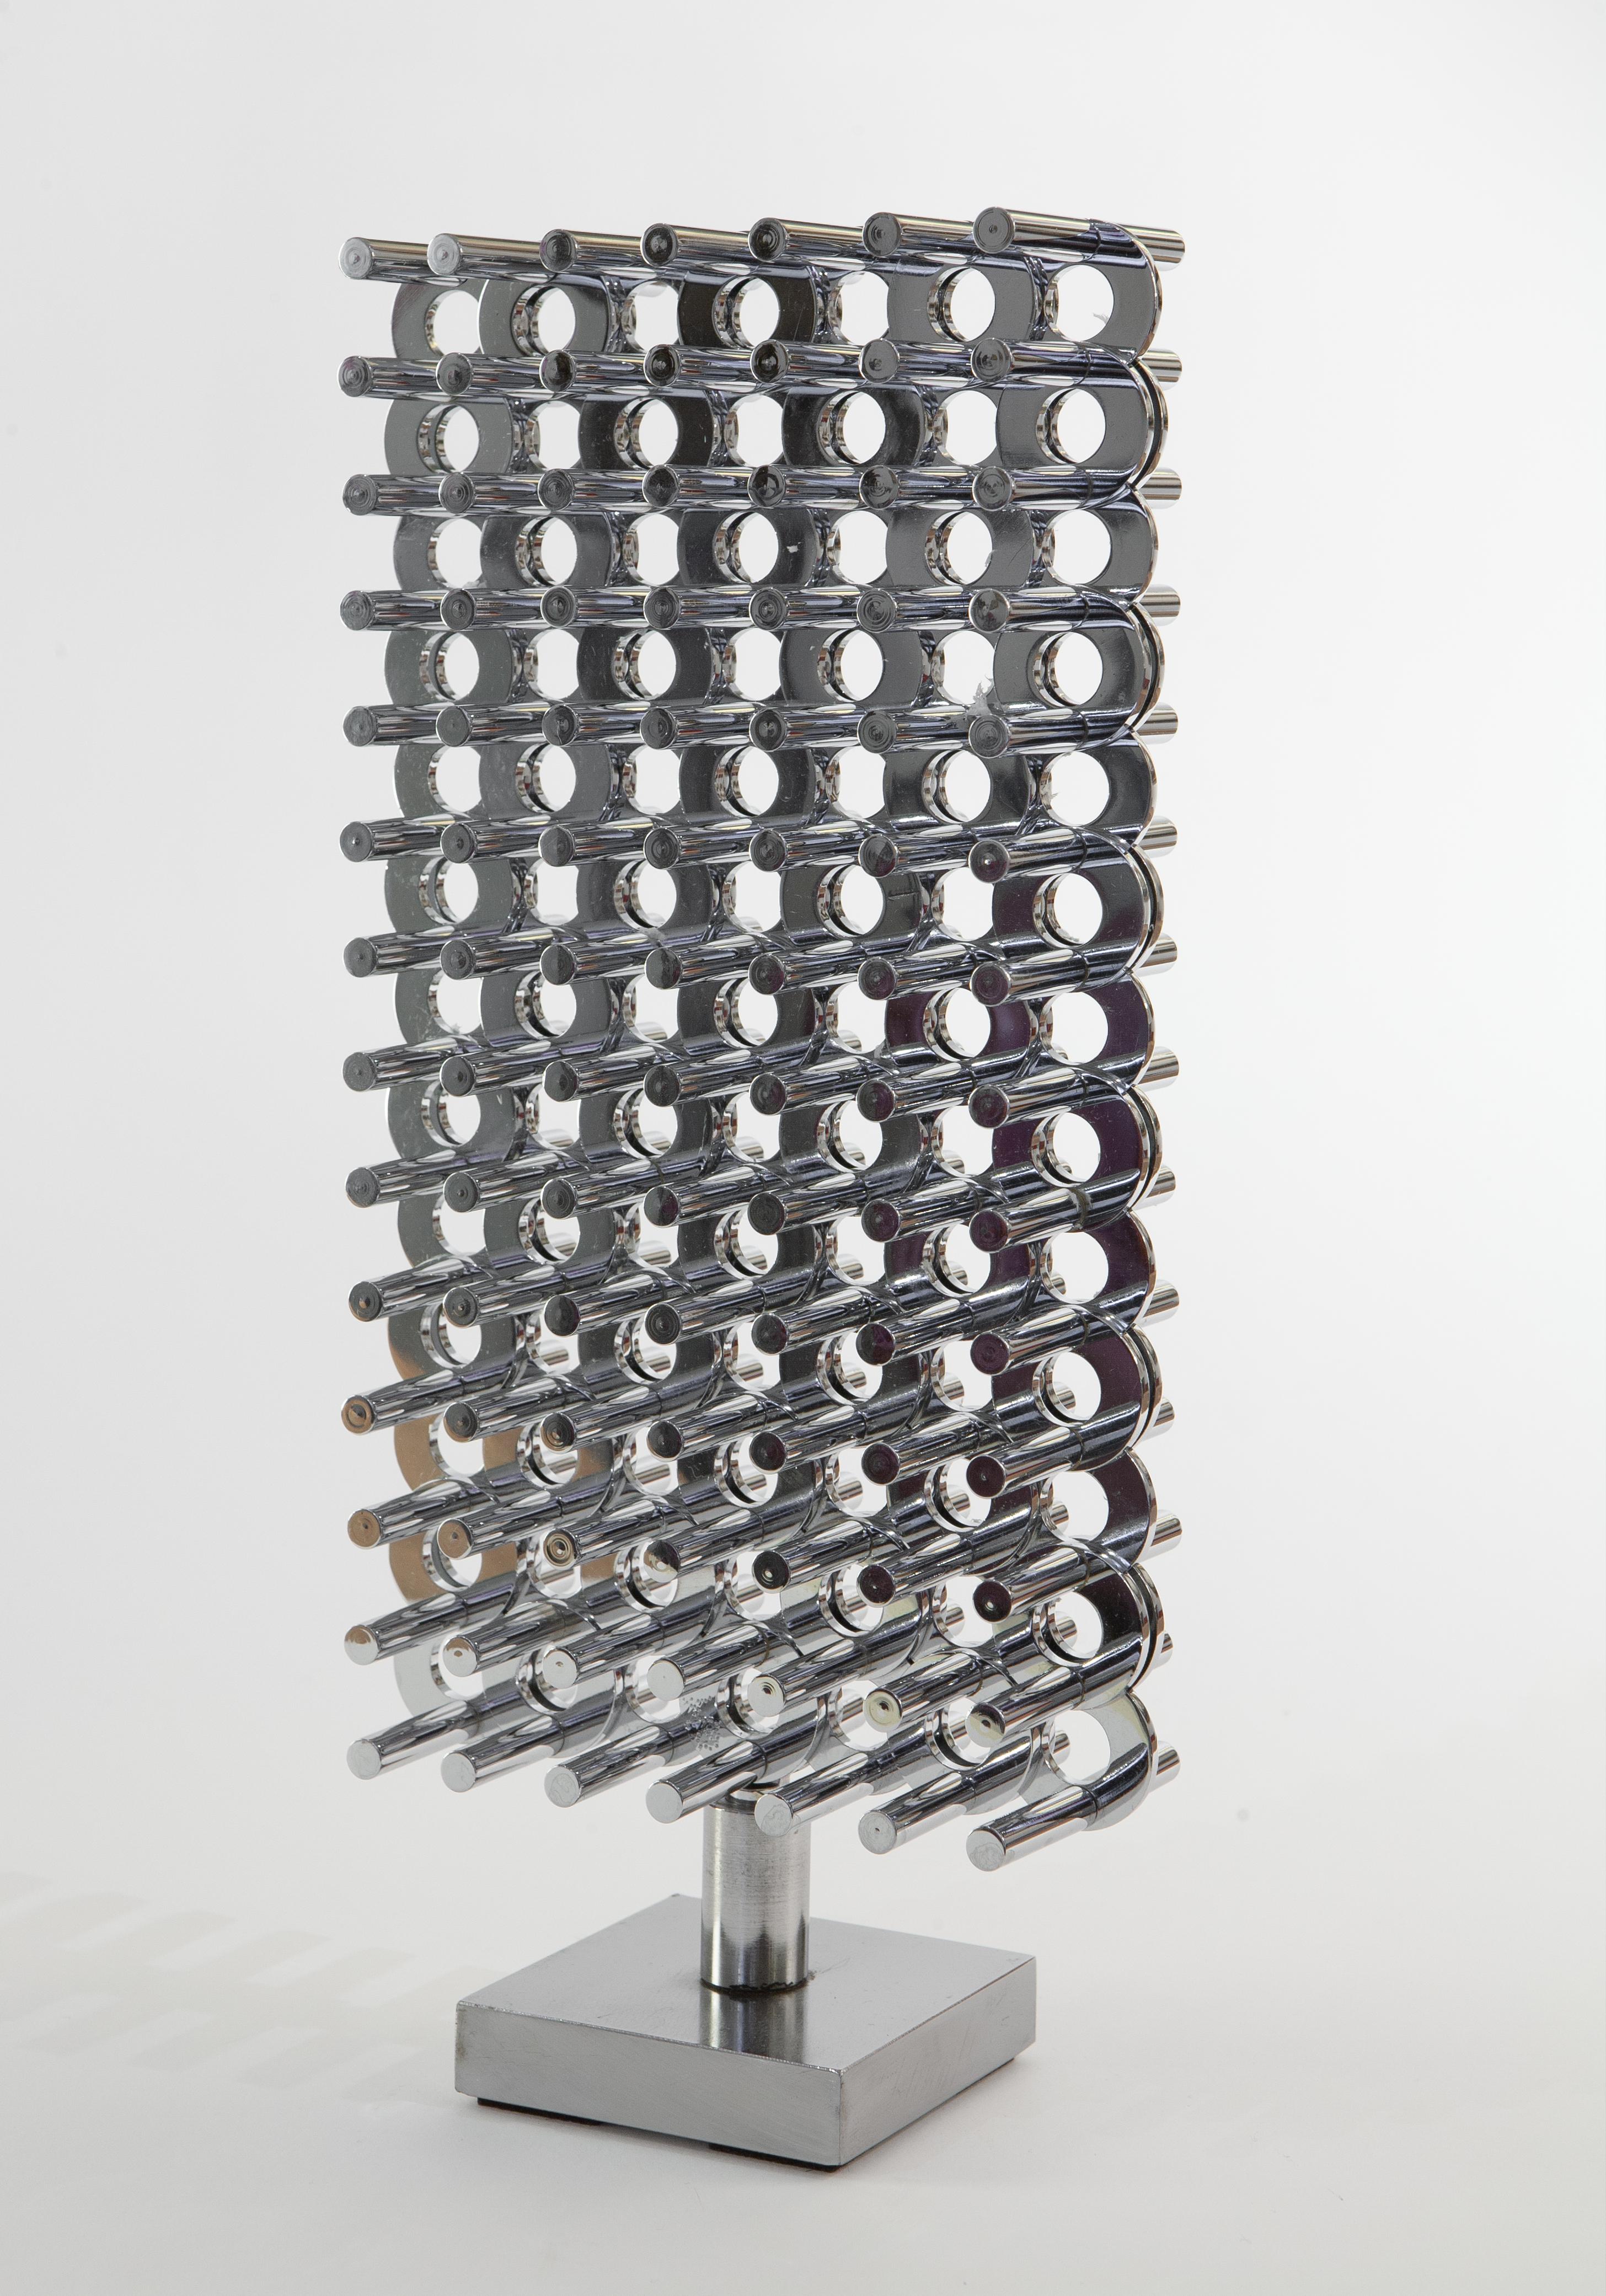 Giuseppe Minoretti Abstract Sculpture - Chrome-plated brass frame